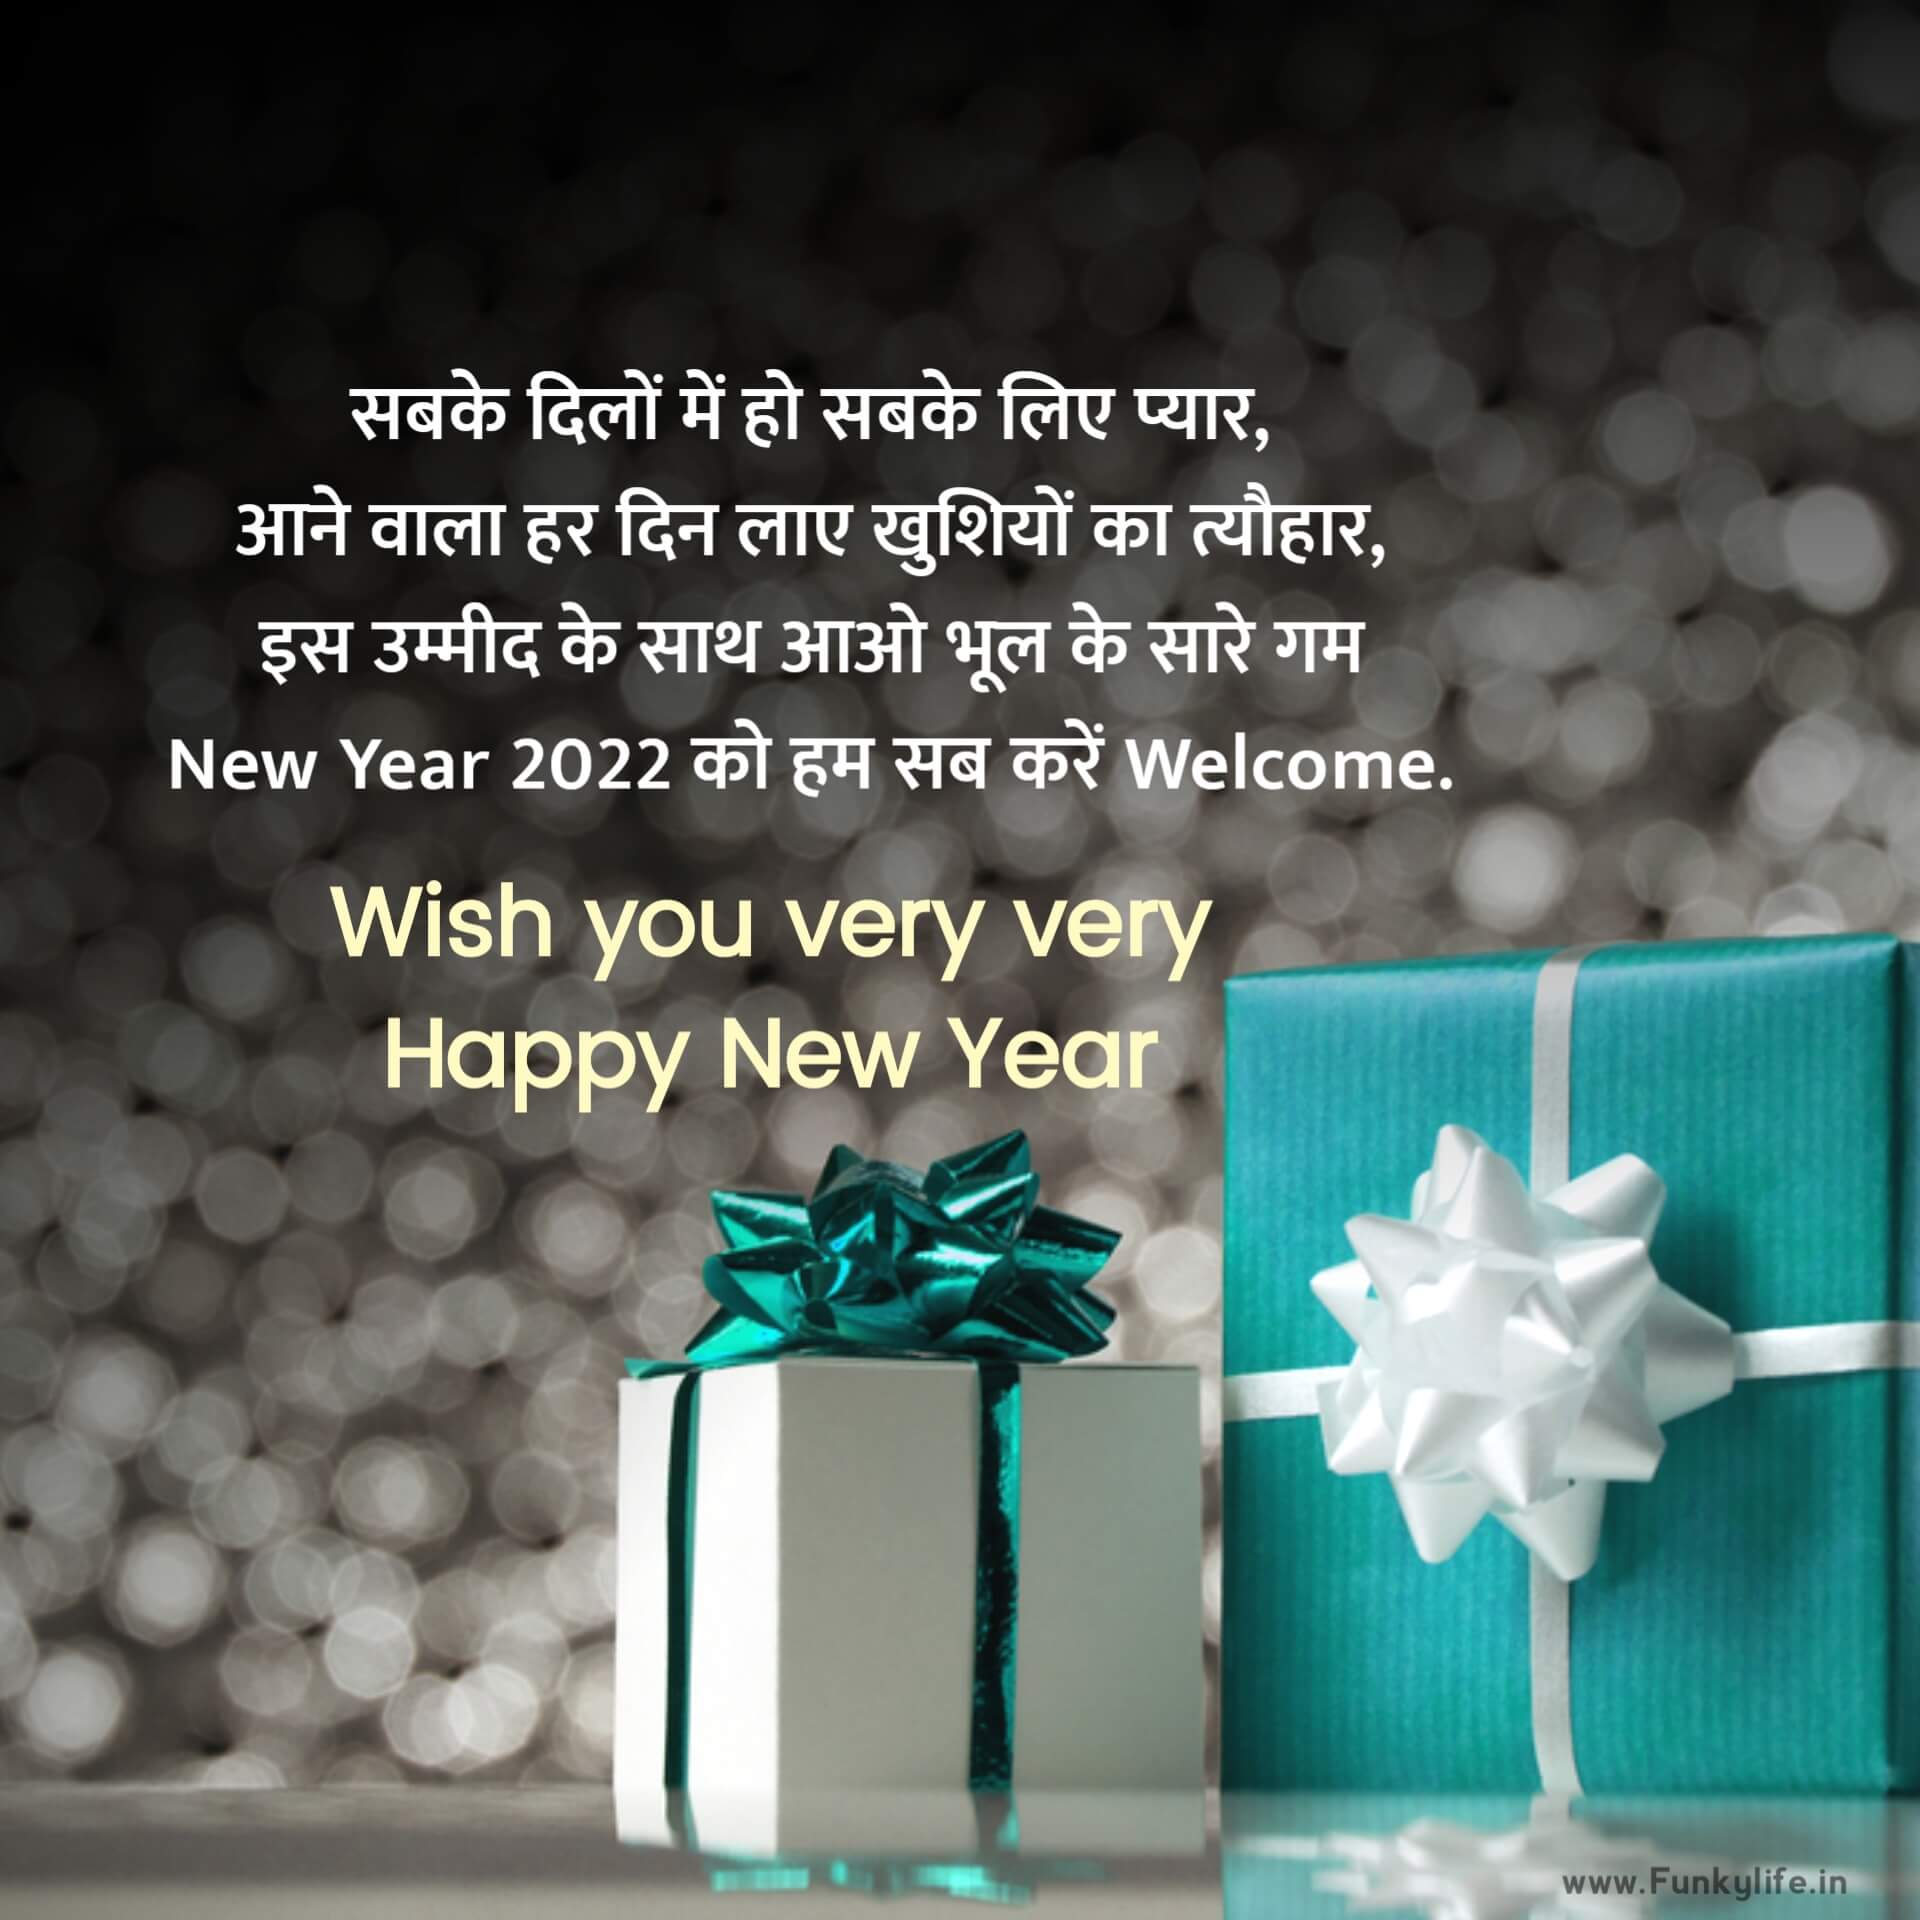 Happy New Year Wishes in Hindi for Everyone